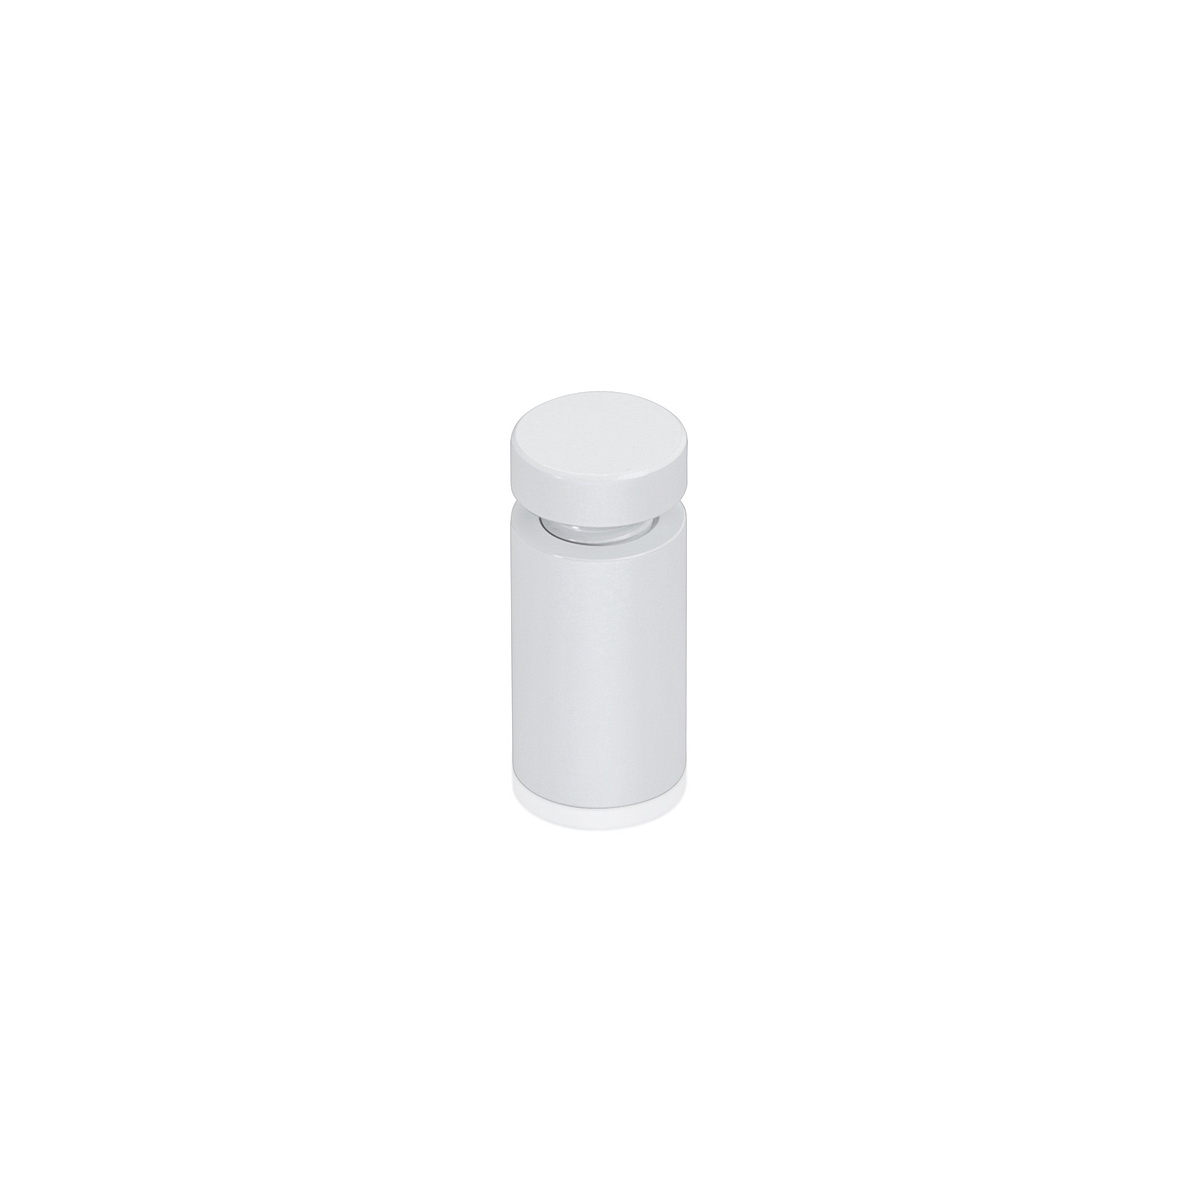 1/2'' Diameter X 3/4'' Barrel Length, Affordable Aluminum Standoffs, White Coated Finish Easy Fasten Standoff (For Inside / Outside use) [Required Material Hole Size: 3/8'']